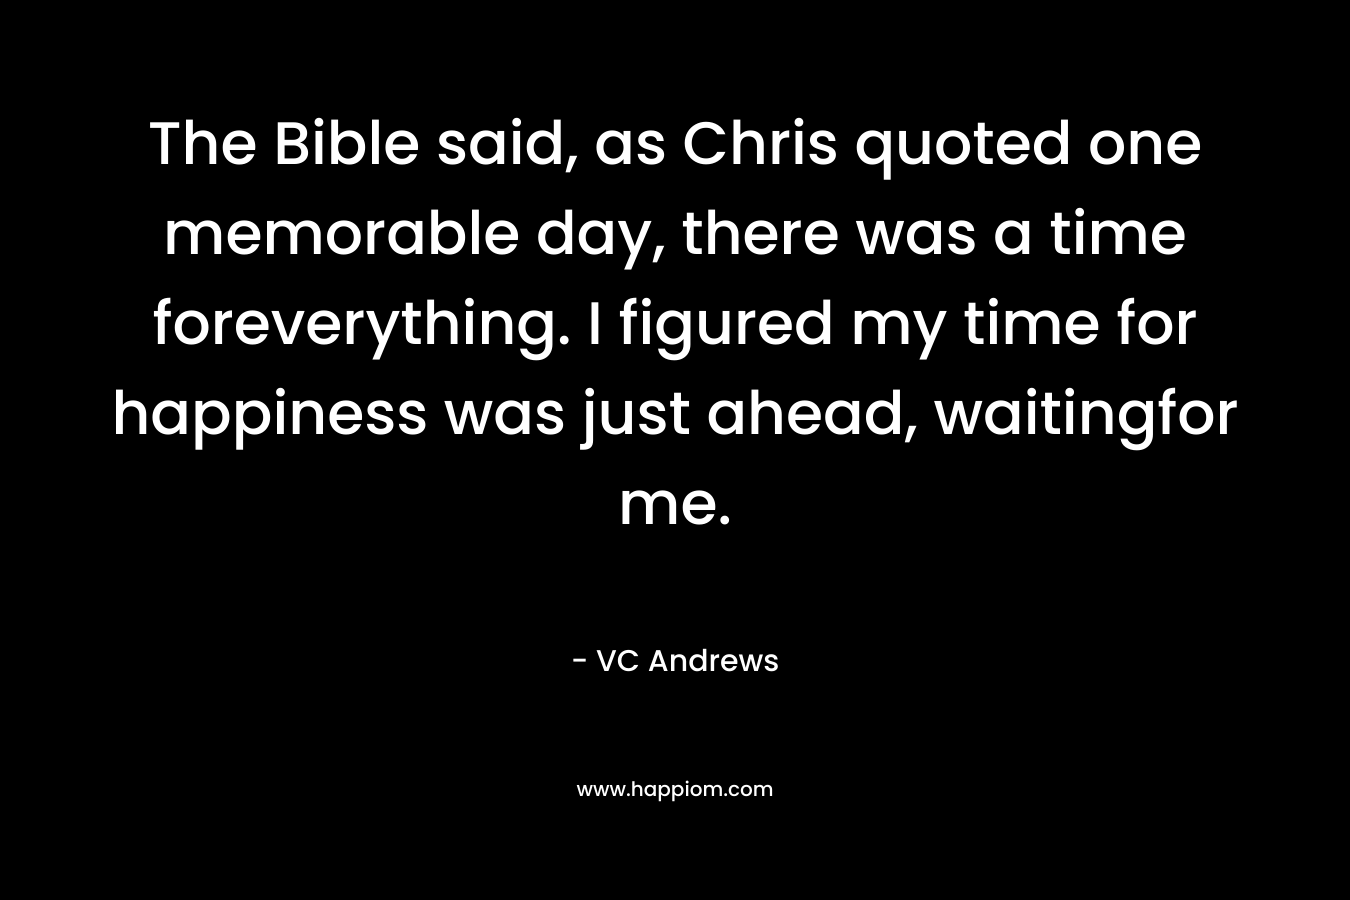 The Bible said, as Chris quoted one memorable day, there was a time foreverything. I figured my time for happiness was just ahead, waitingfor me.